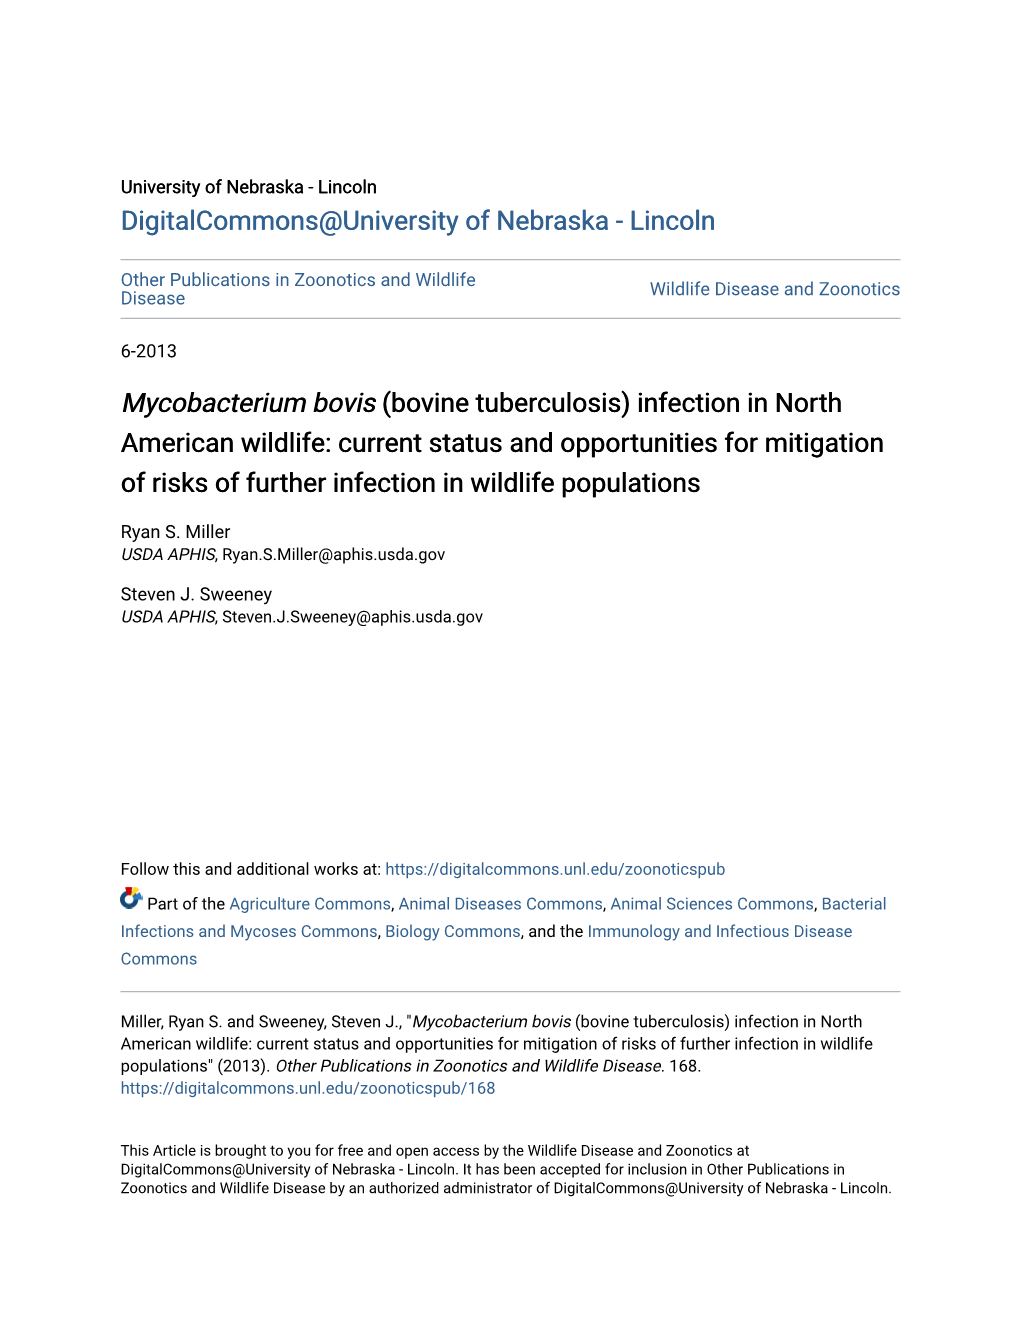 Bovine Tuberculosis) Infection in North American Wildlife: Current Status and Opportunities for Mitigation of Risks of Further Infection in Wildlife Populations